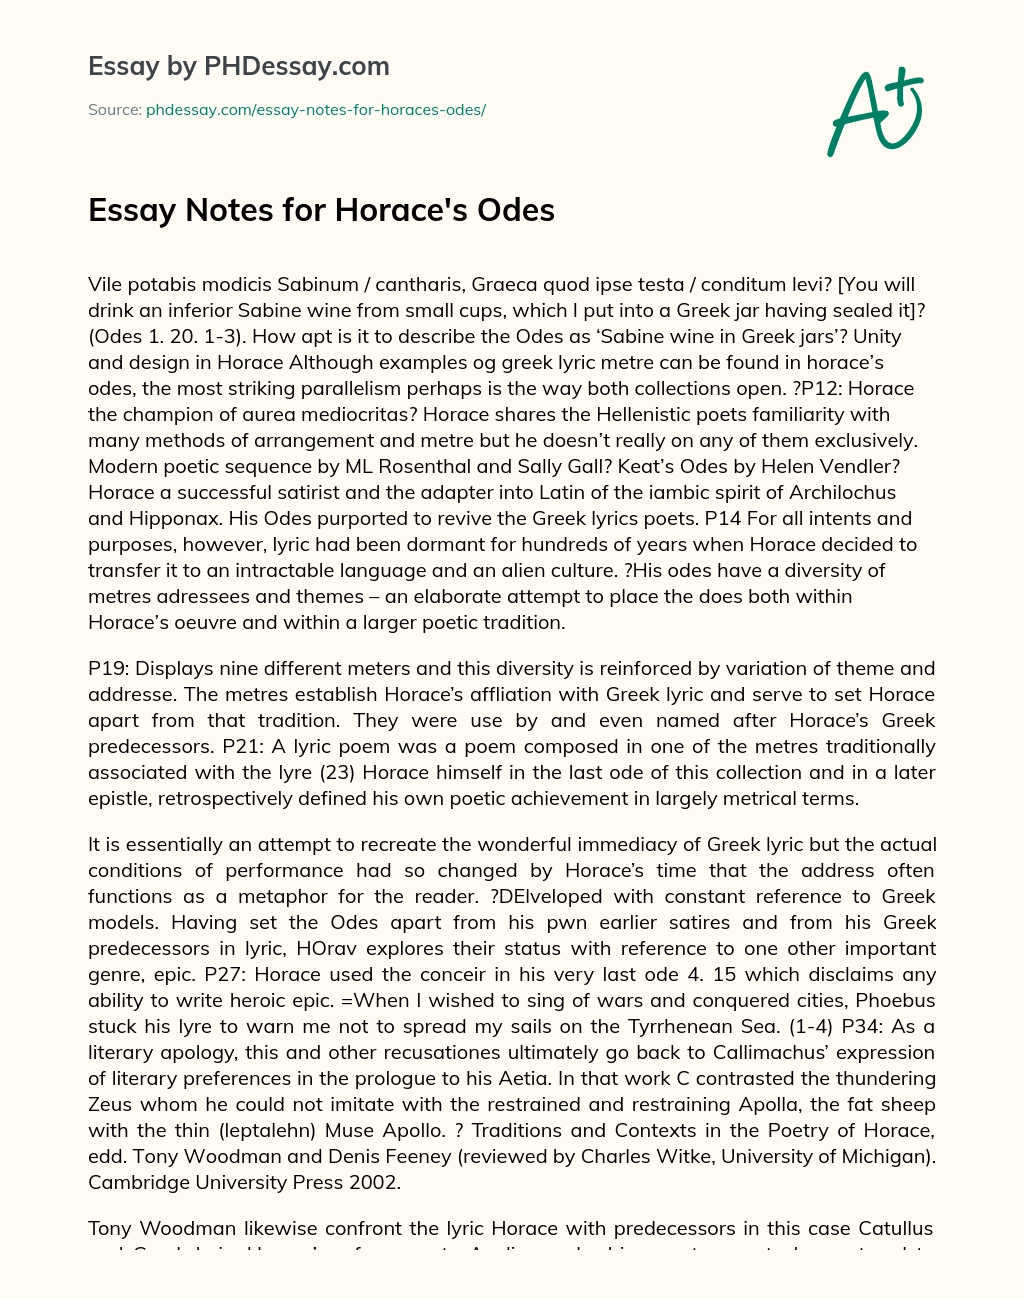 Essay Notes for Horace’s Odes essay